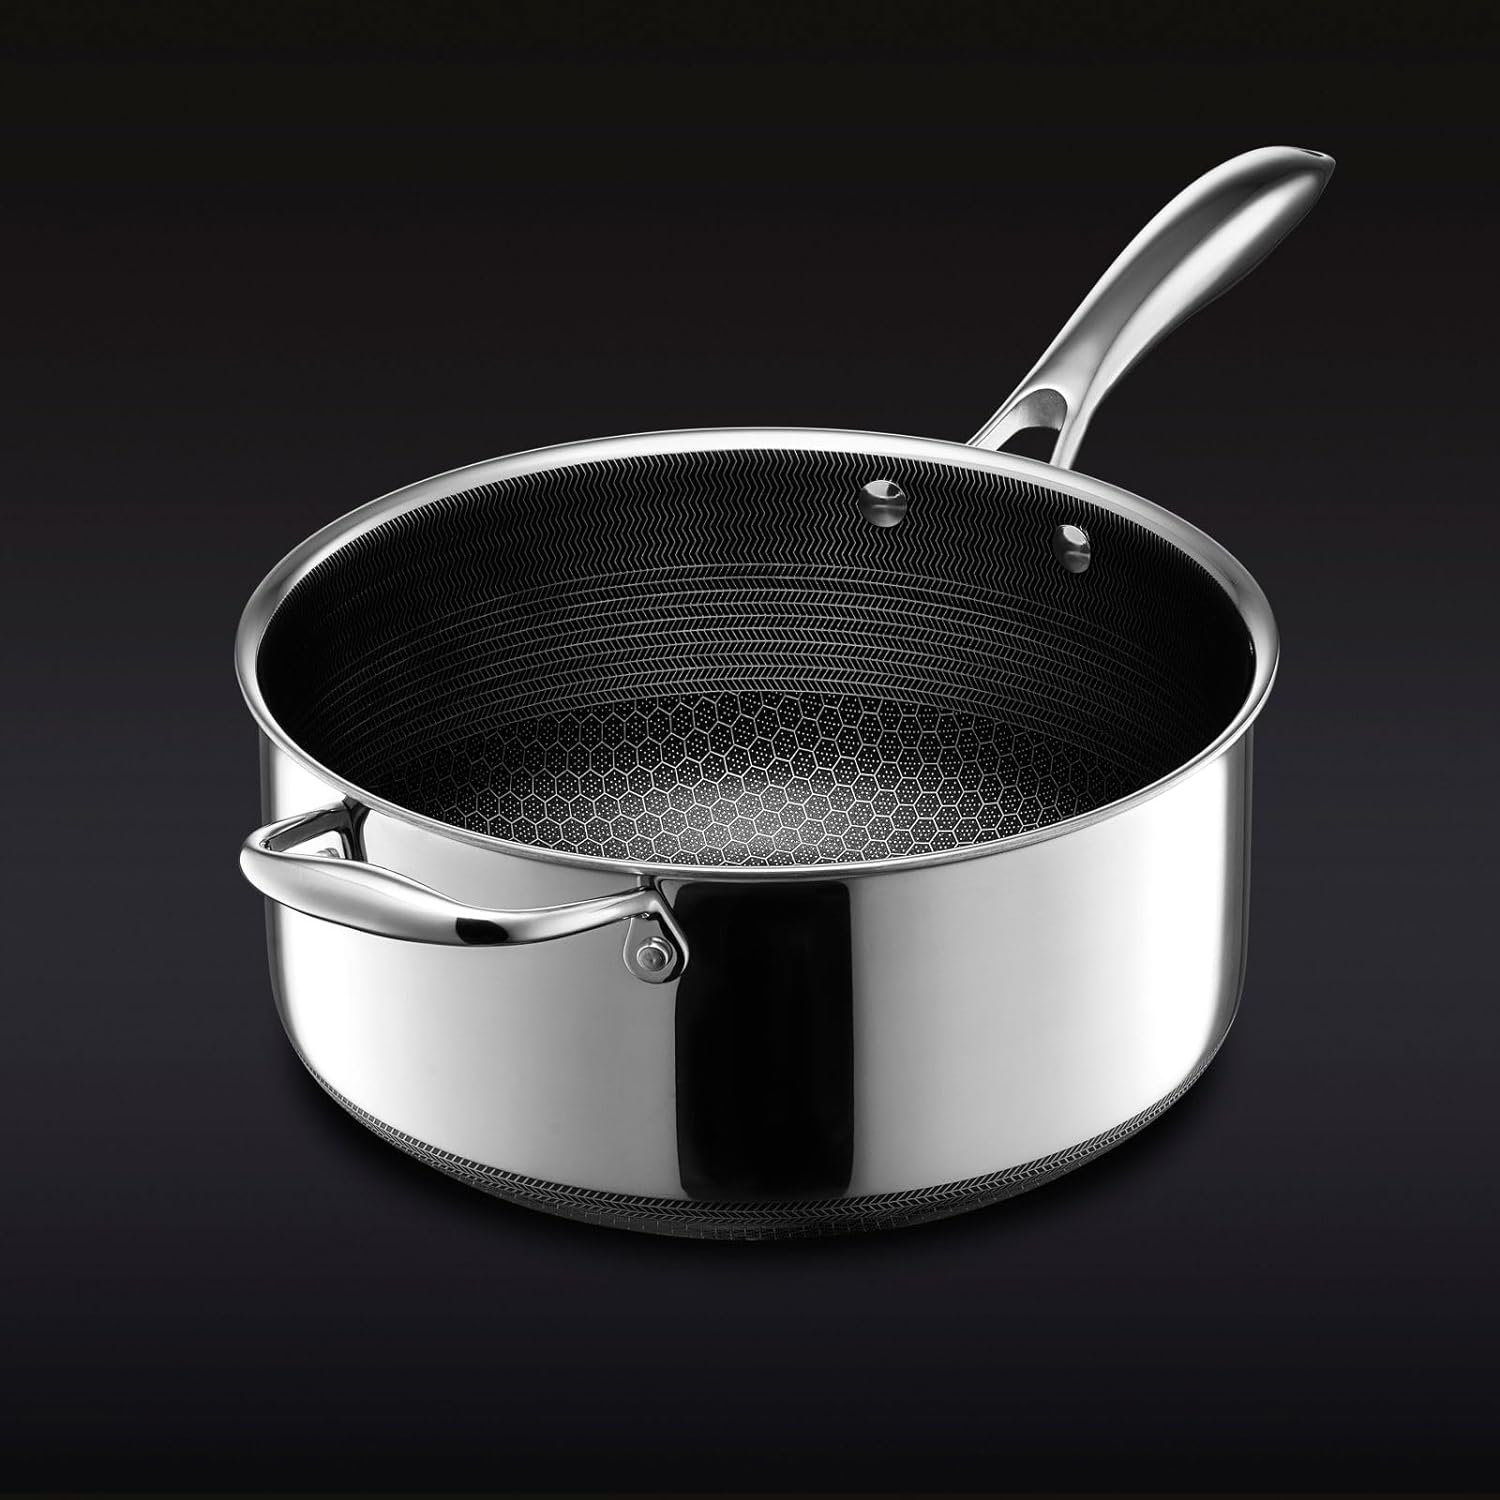 https://bigbigmart.com/wp-content/uploads/2023/12/HexClad-Hybrid-Nonstick-5-Quart-Saucepan-with-Tempered-Glass-Lid-Stay-Cool-Handle-Dishwasher-Safe-Induction-Ready-Compatible-with-All-Cooktops1.jpg